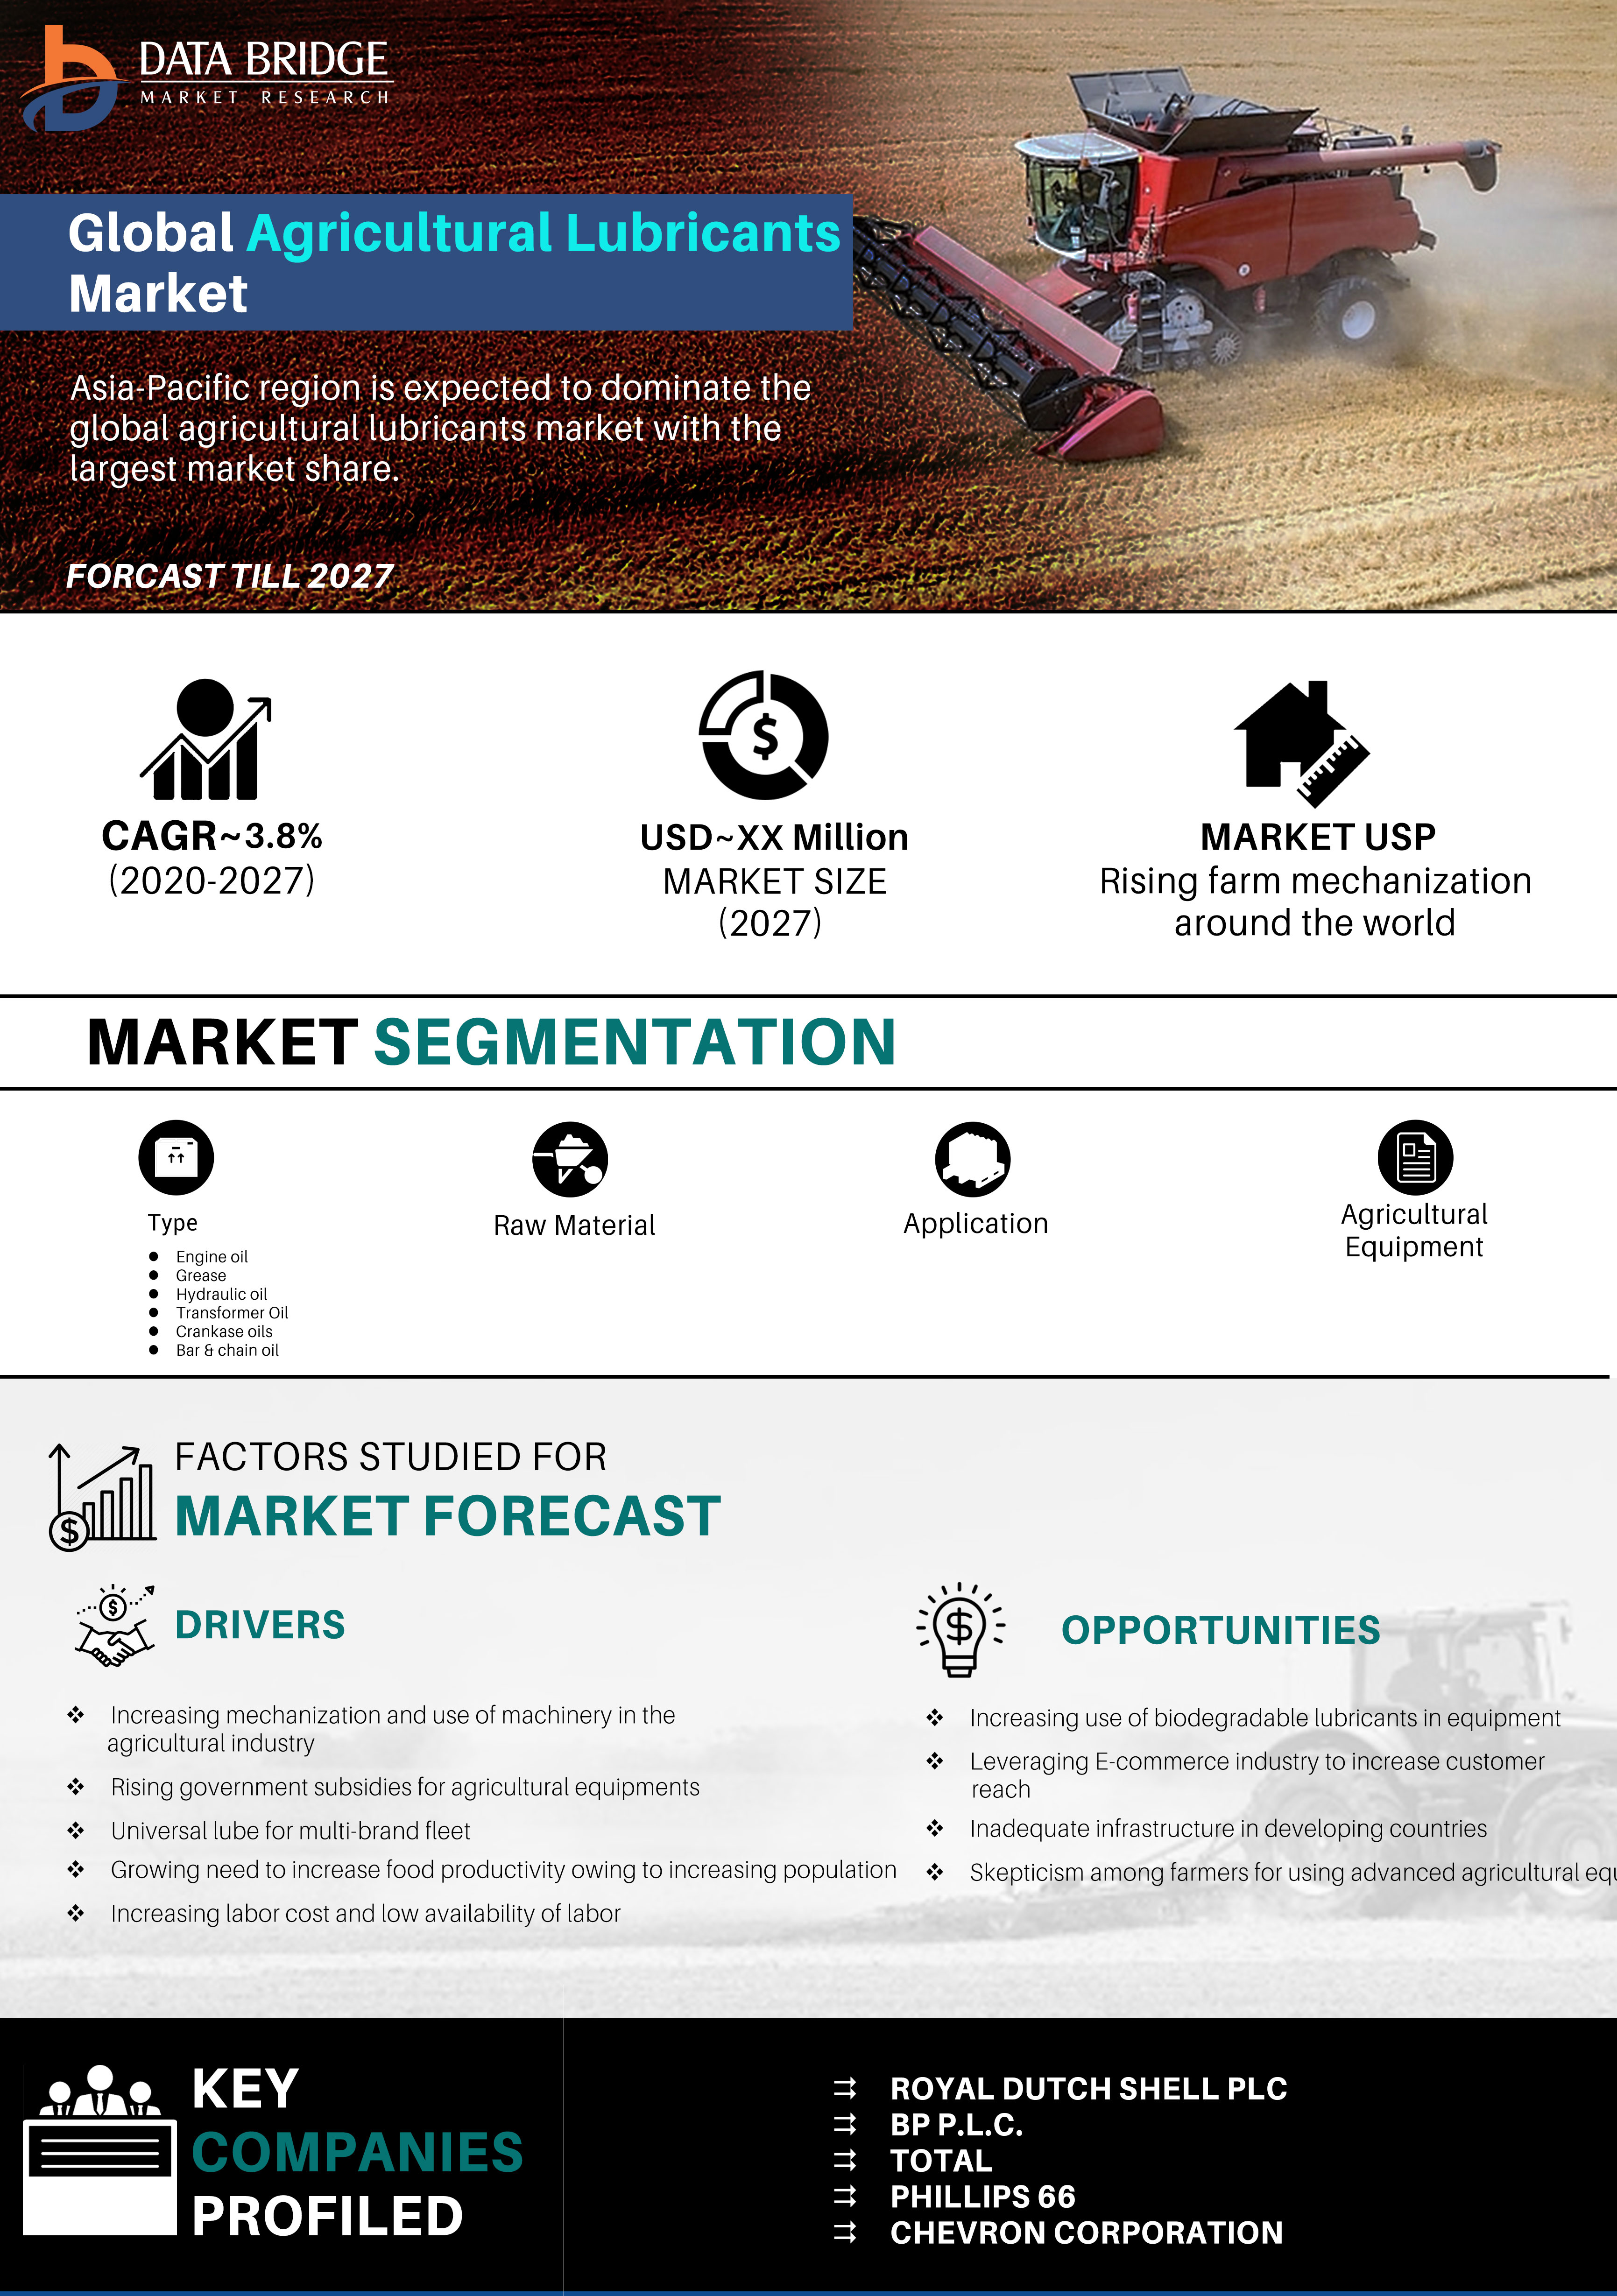 Agricultural Lubricants Market